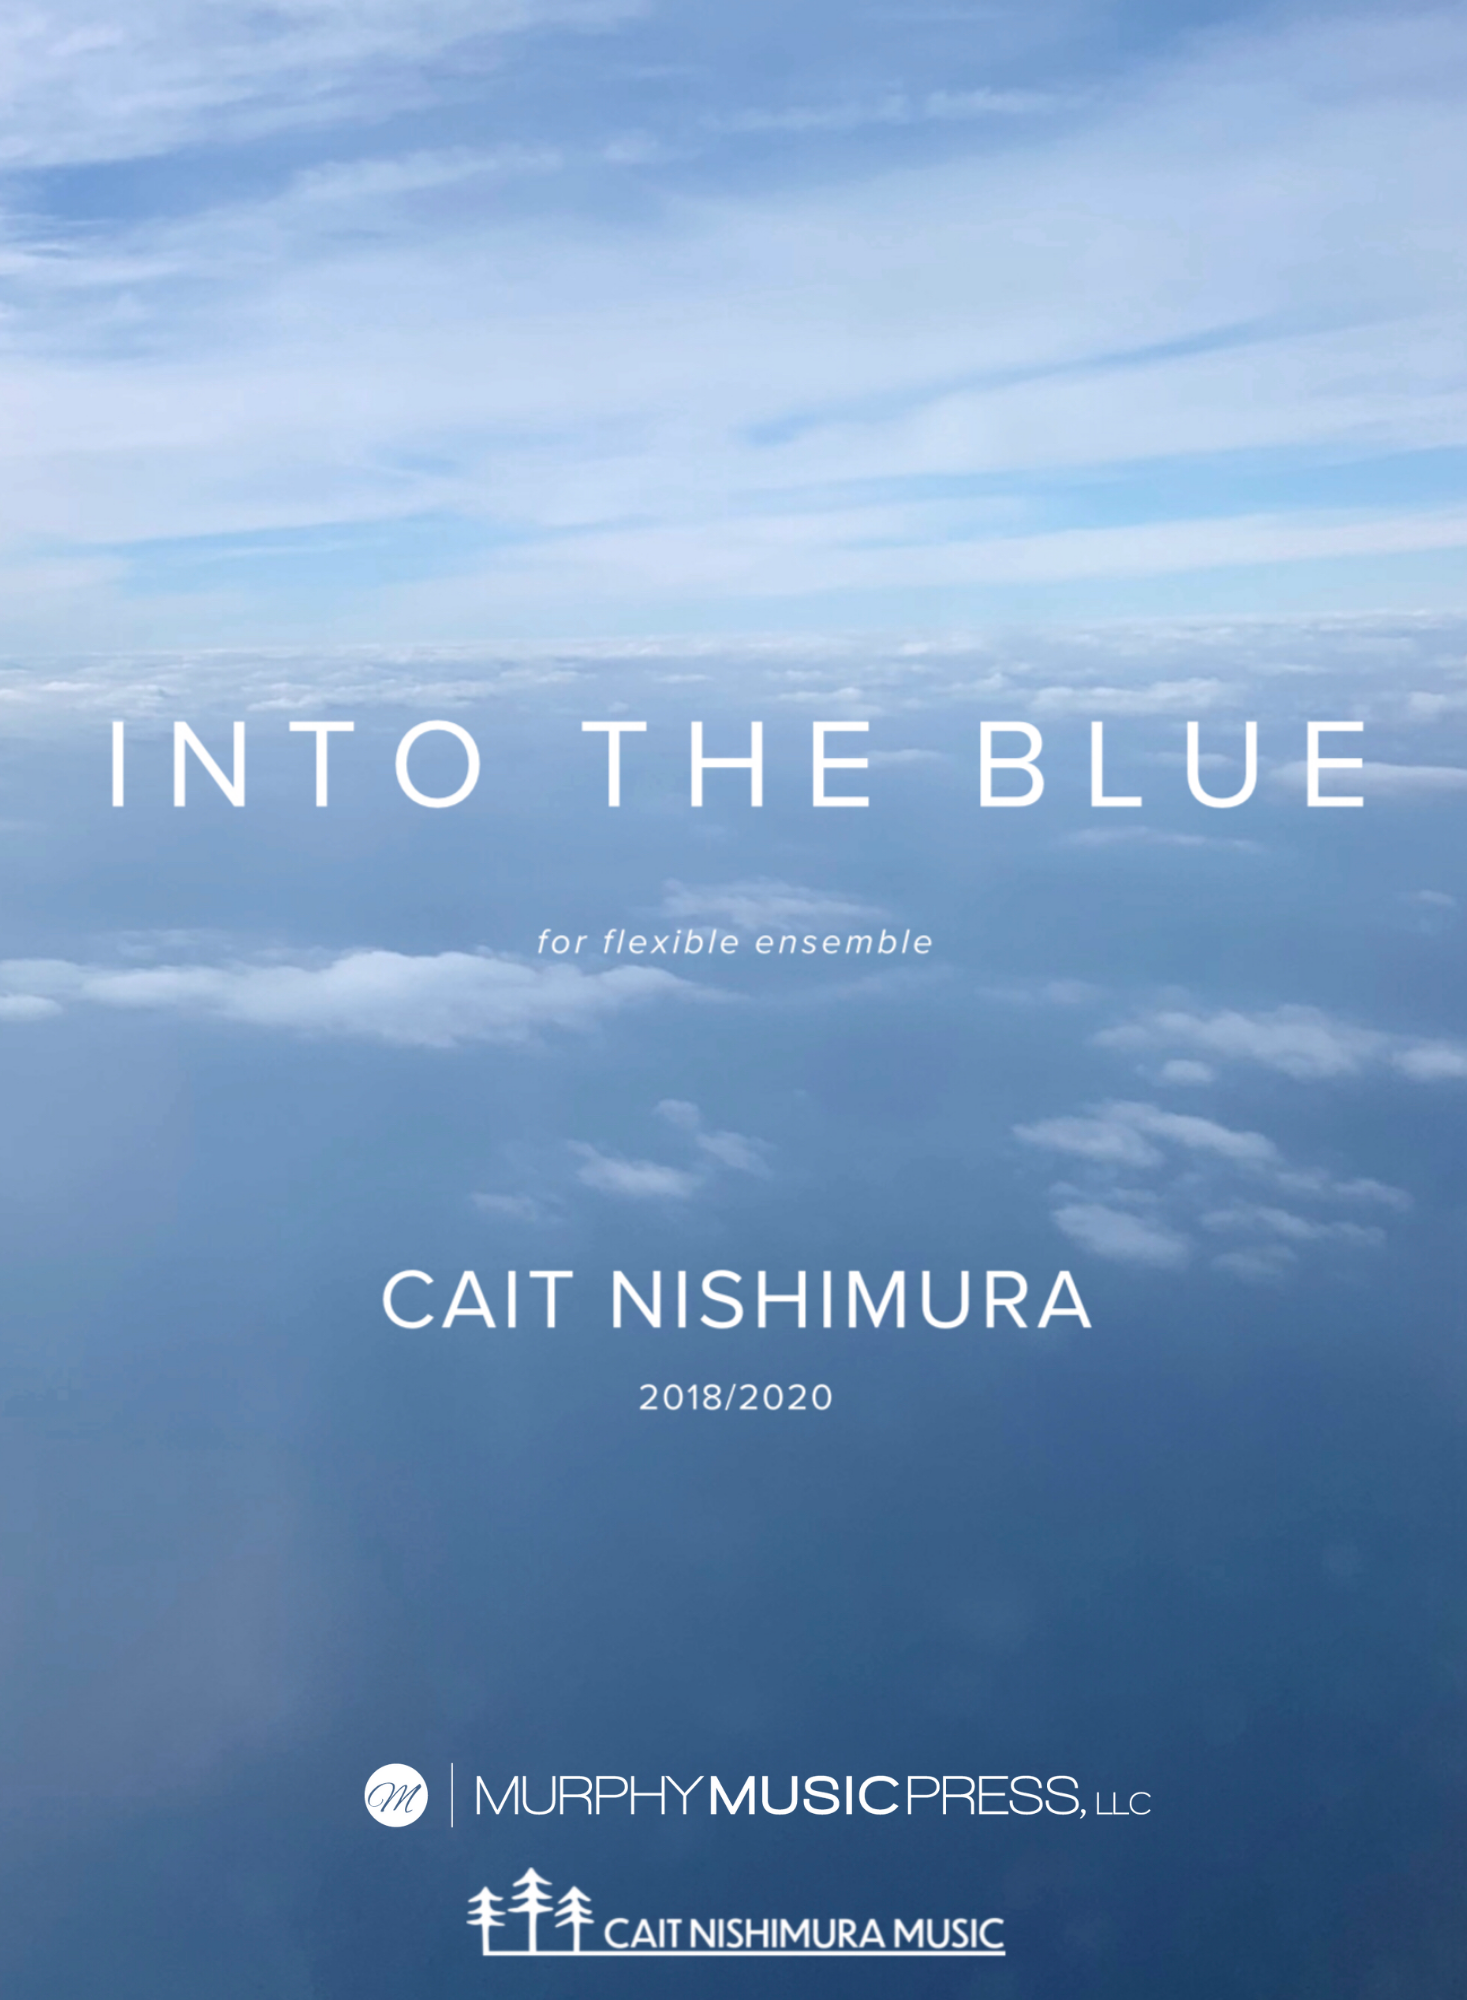 Into The Blue (Flex Band Version) by Cait Nishimura